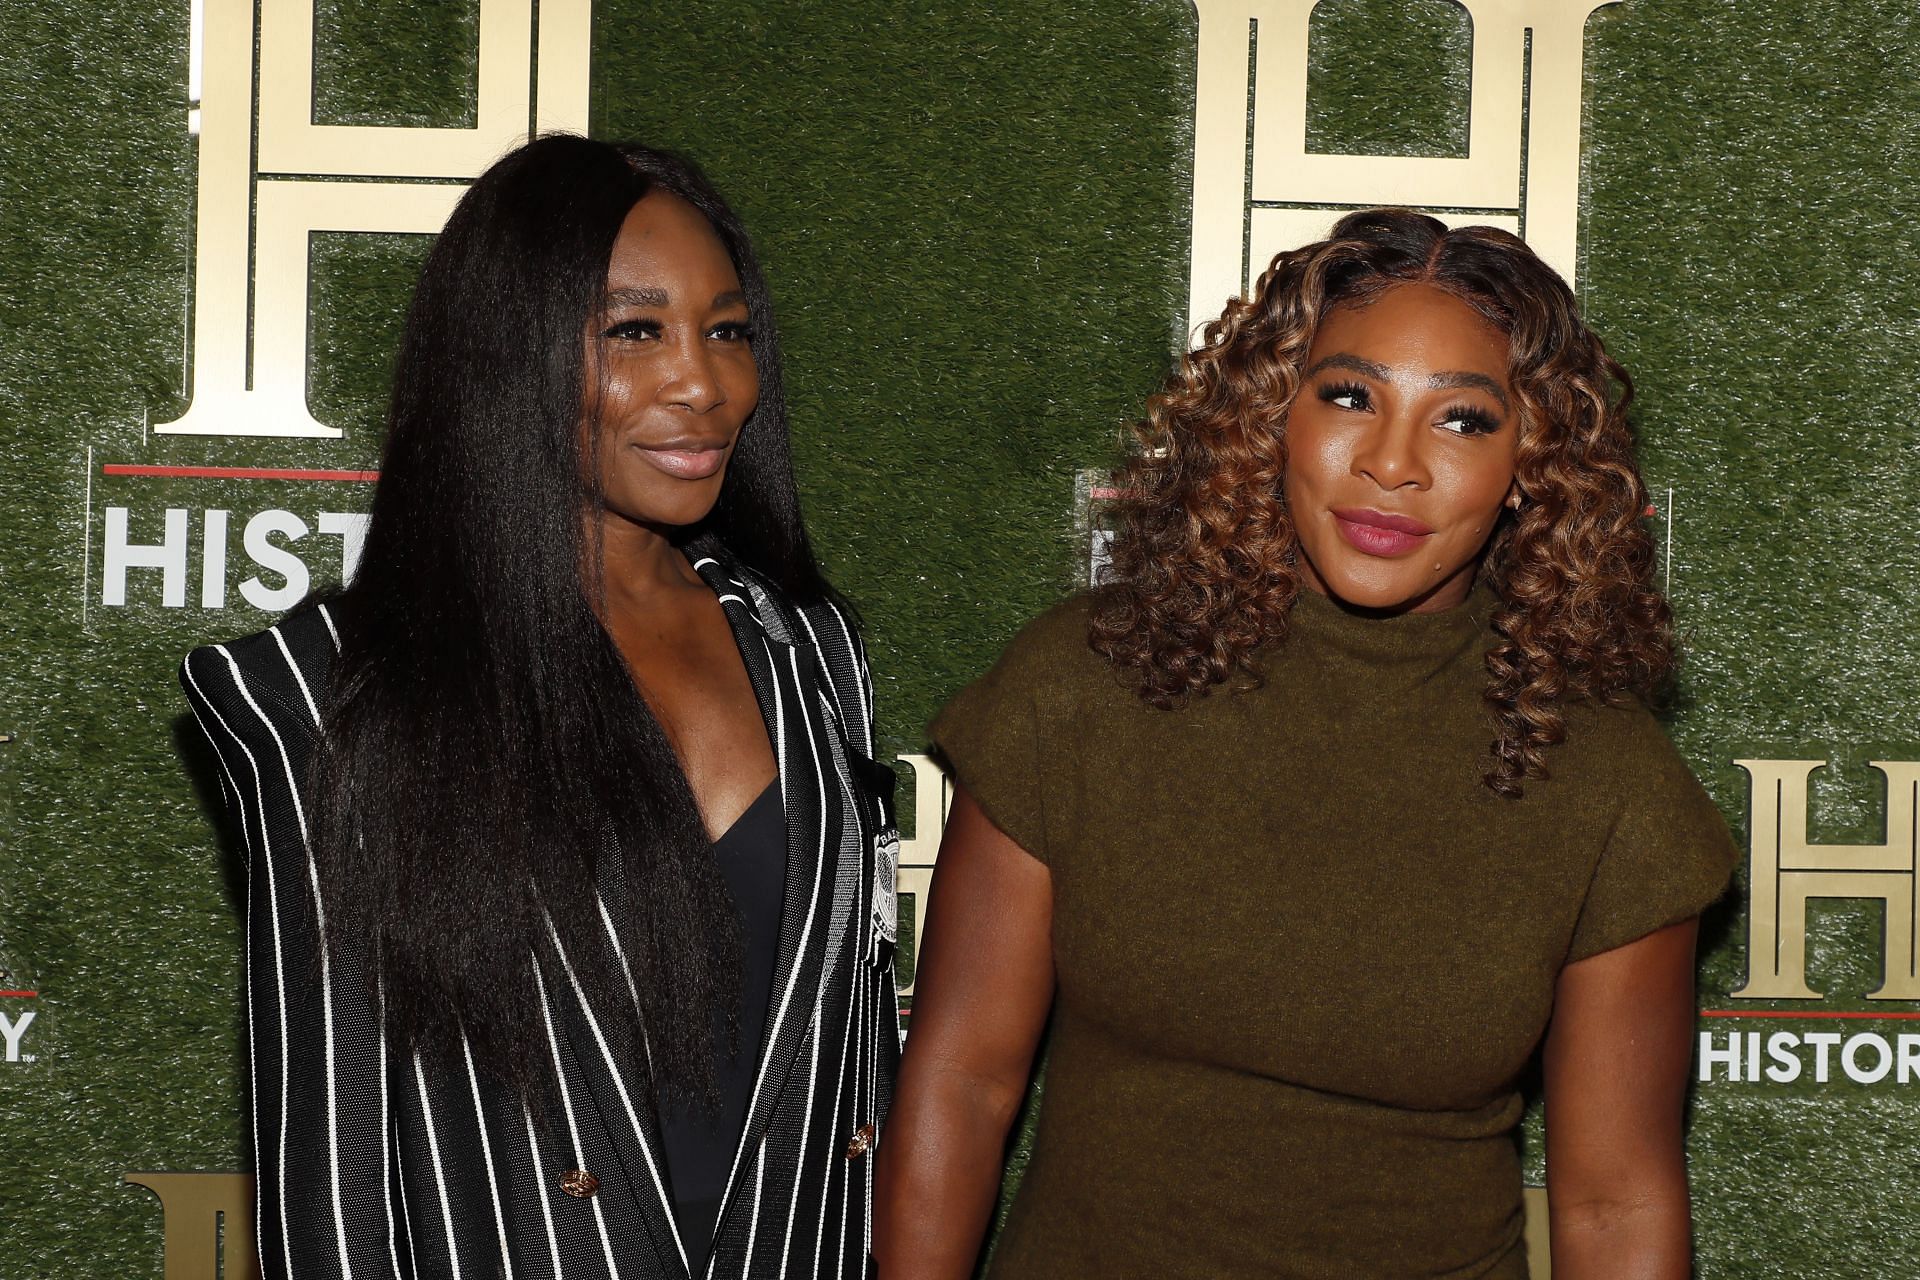 Williams sisters at the HISTORY Talks 2022